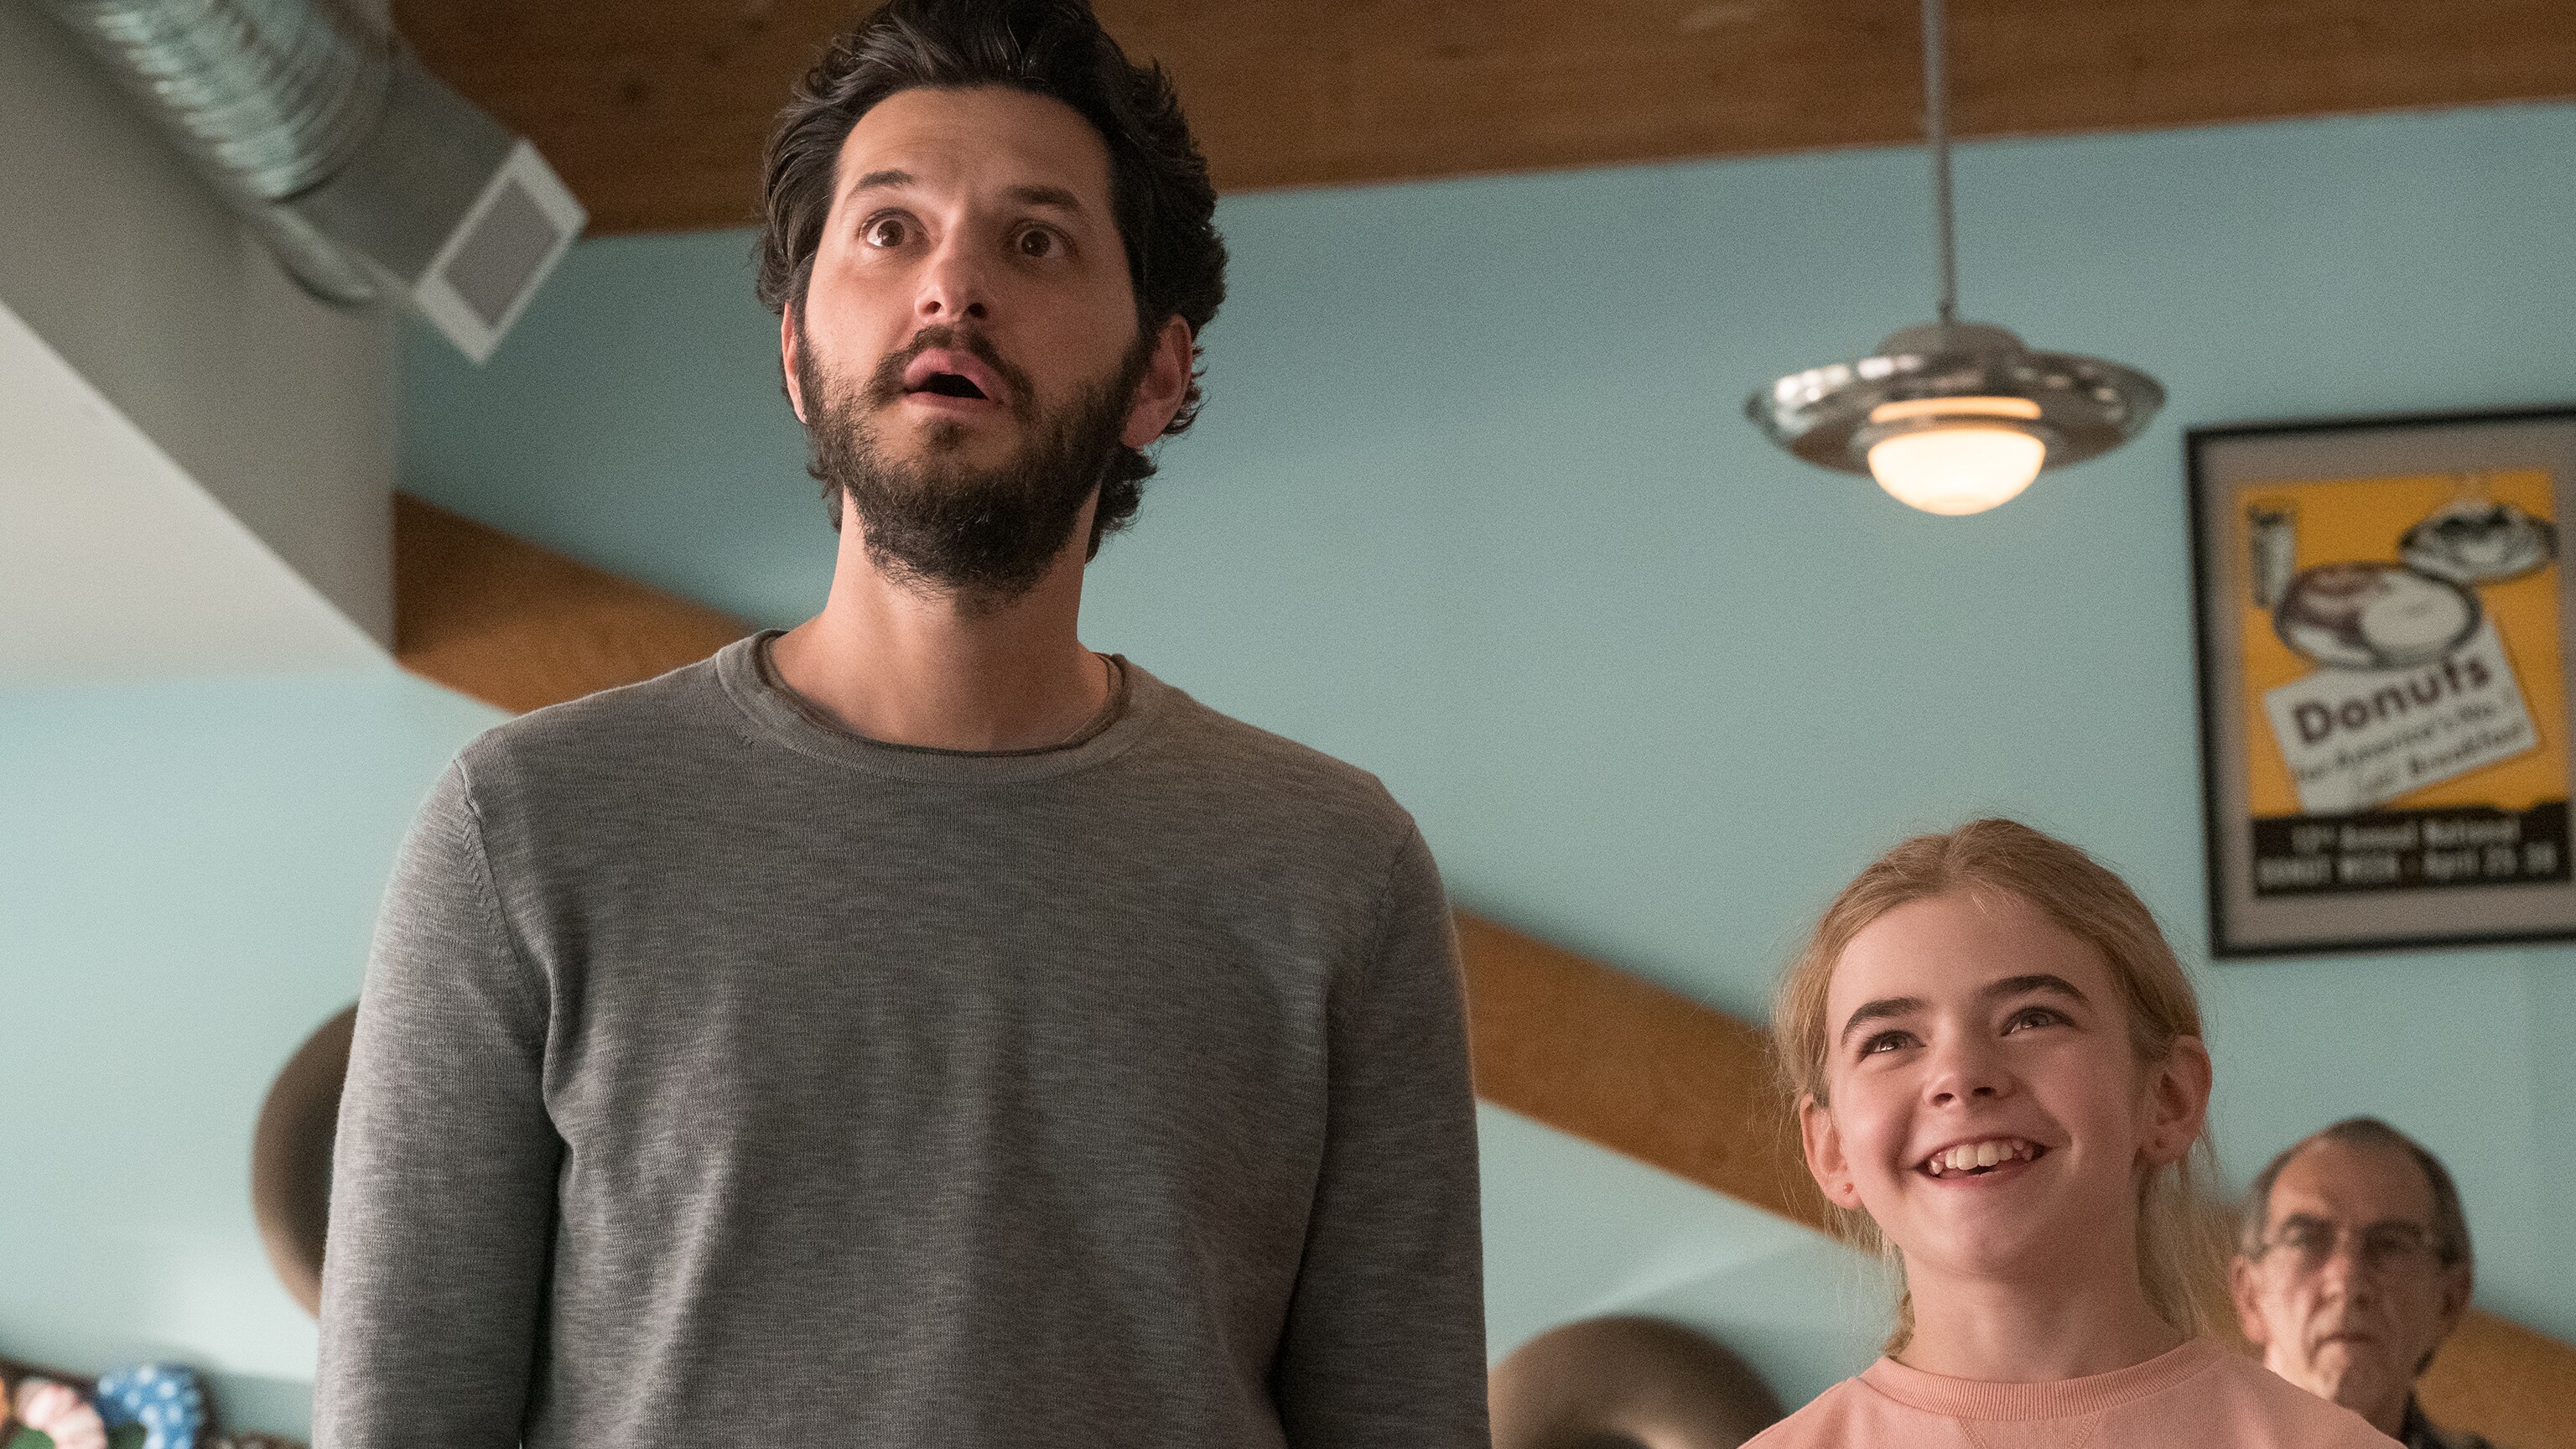 Ben Schwartz as George and Matilda Lawler as Flora in FLORA & ULYSSES, exclusively on Disney+.